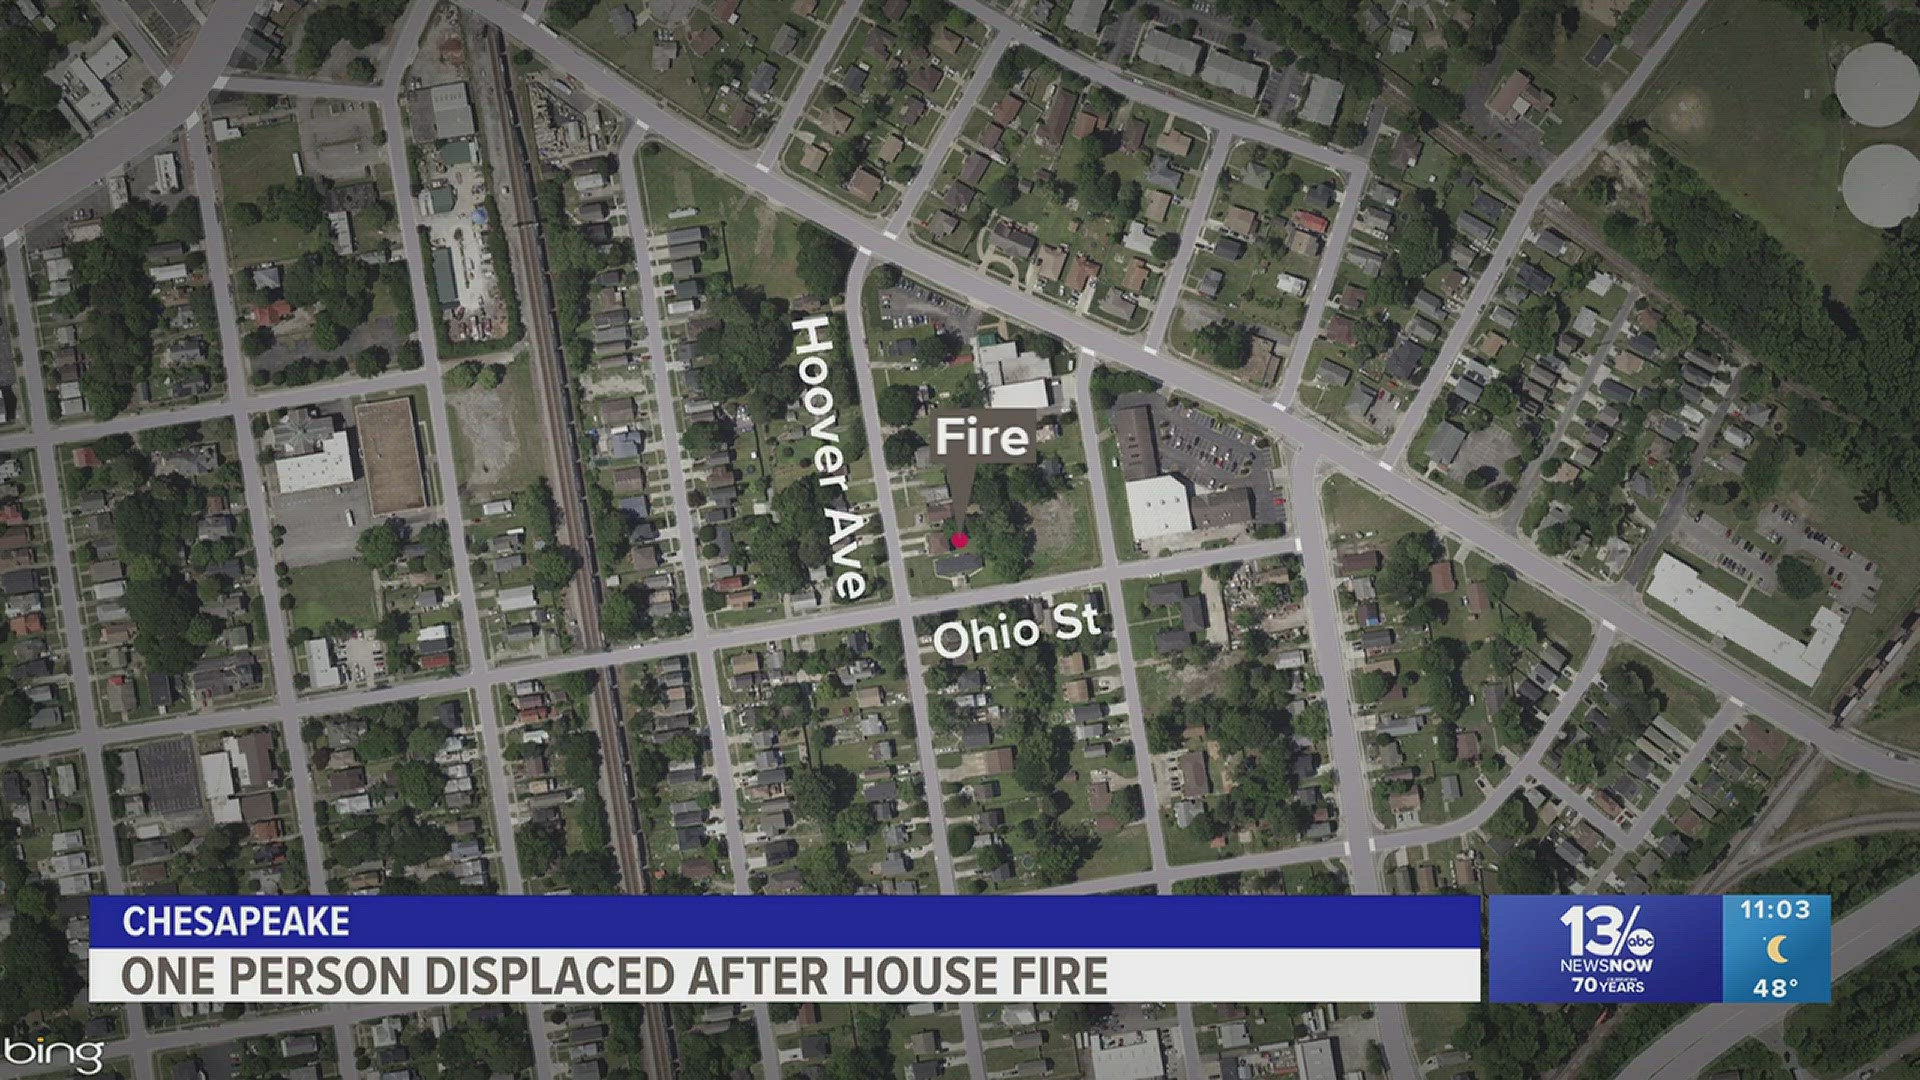 A fire in Chesapeake displaces one.